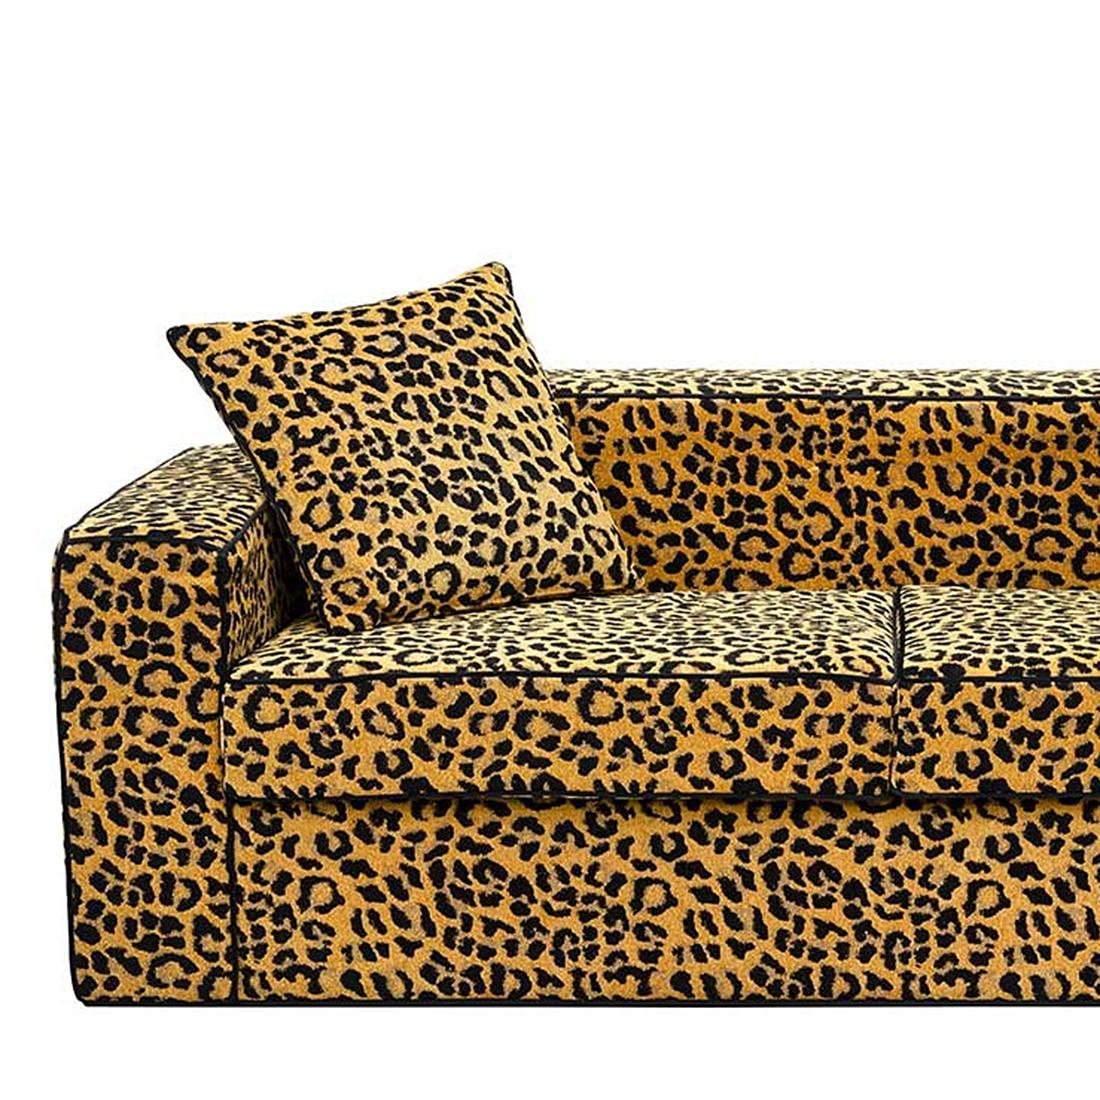 Sofa leopard 2-seat with wooden
structure. Upholstered and covered
with smooth velvet leopard fabric. With
2 cushions included.
Also available with black velvet fabric.
With 2 cushions included.